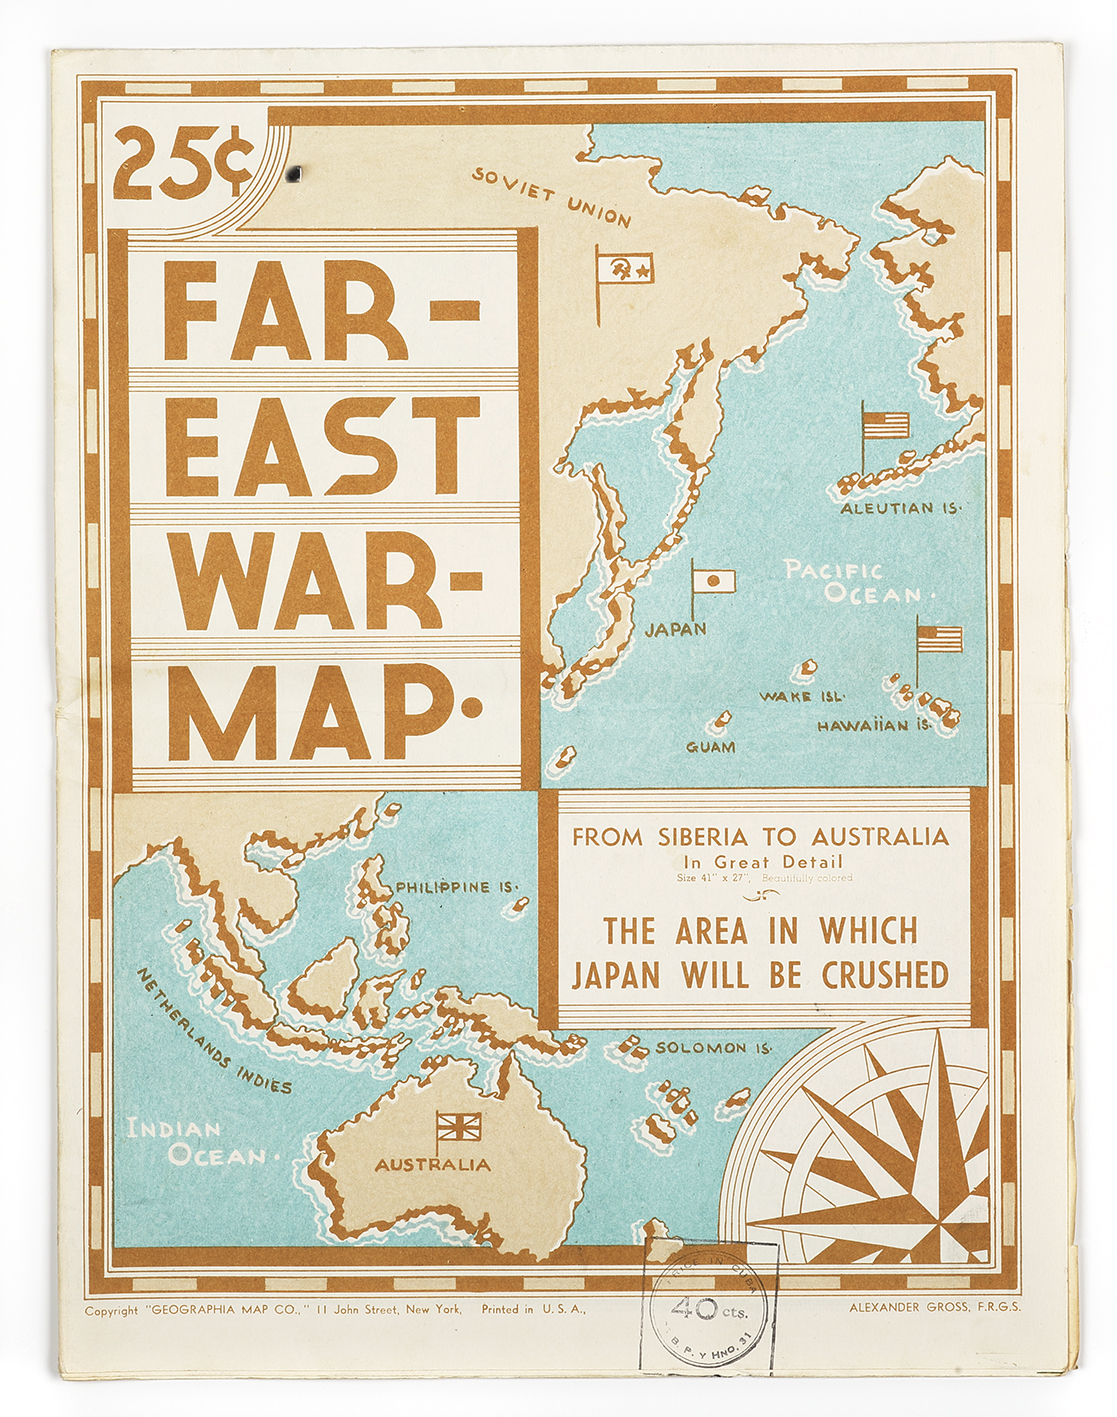 Far-East War-Map. from Siberia to Australia In Great Detail / The Area in Which Japan will be Crushed. - Vintage Map from 1943